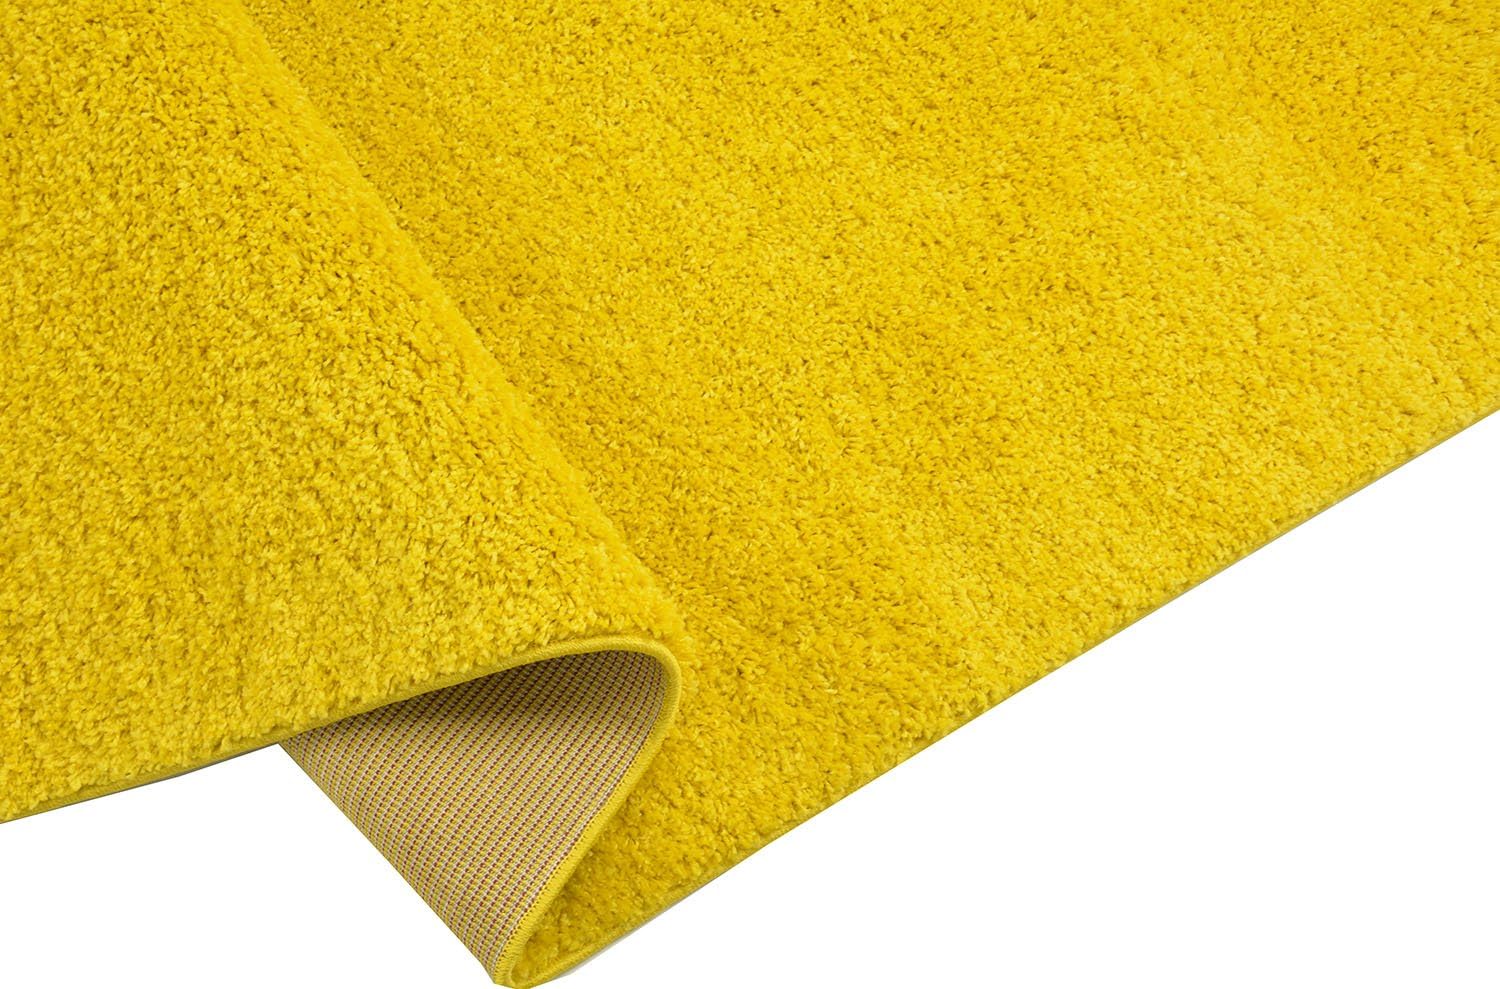 SOHO Shaggy Collection Solid Color Shag Area Rug (Yellow, 8 x 10) - 0